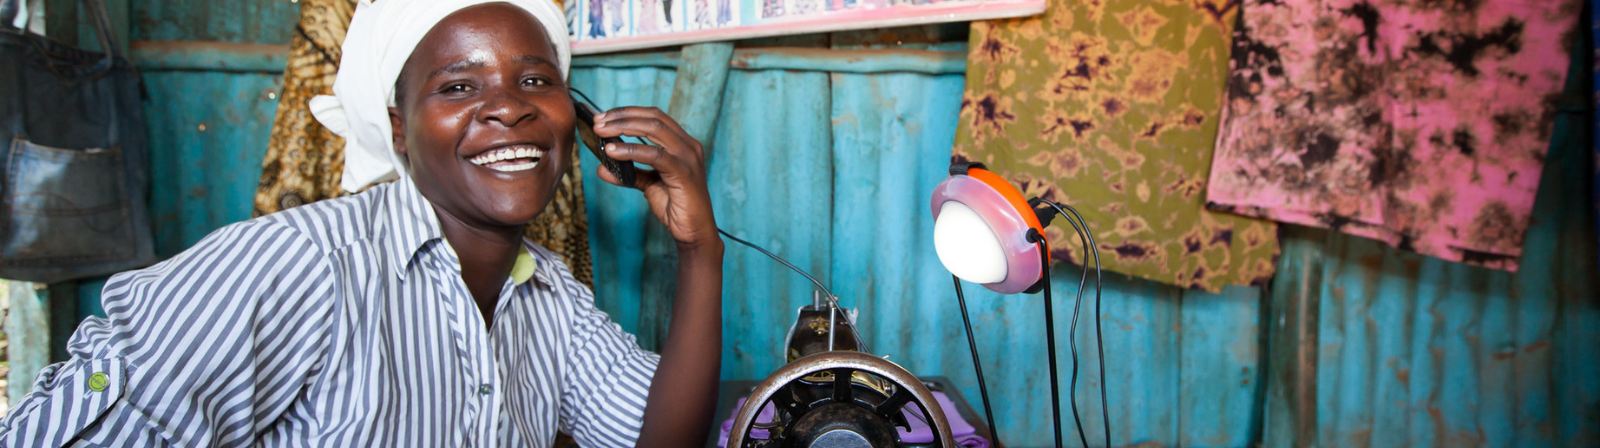 Rose Owino a tailor in Migori, uses a solar light to charge her phone during the day, Migori, Kenya